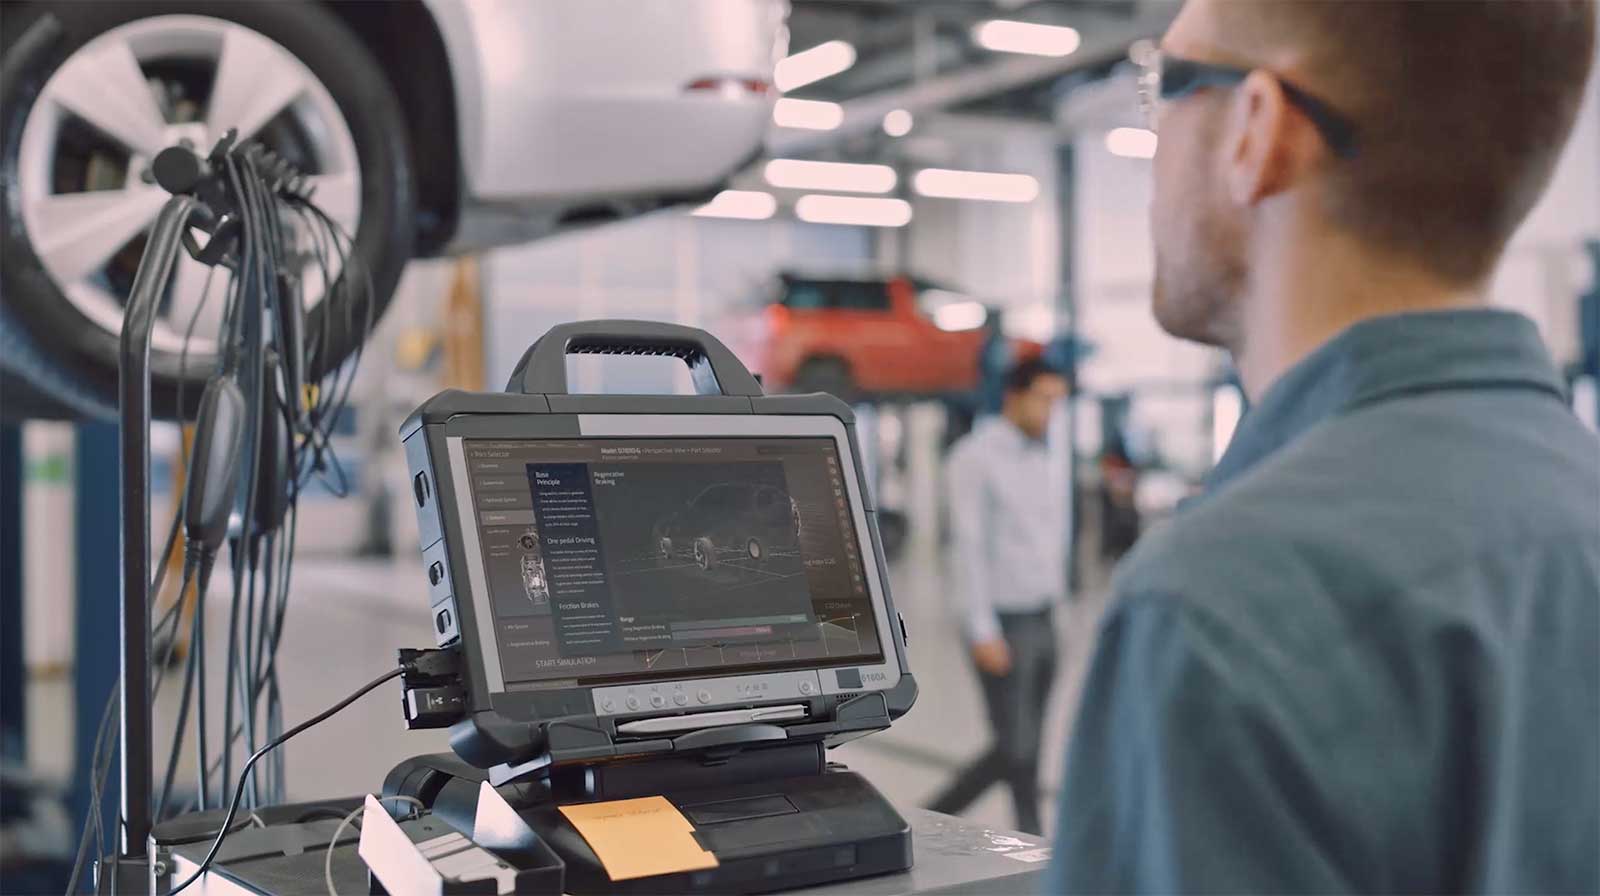 Mechanic at dealership uses an AI software to search for how to complete a complex process.